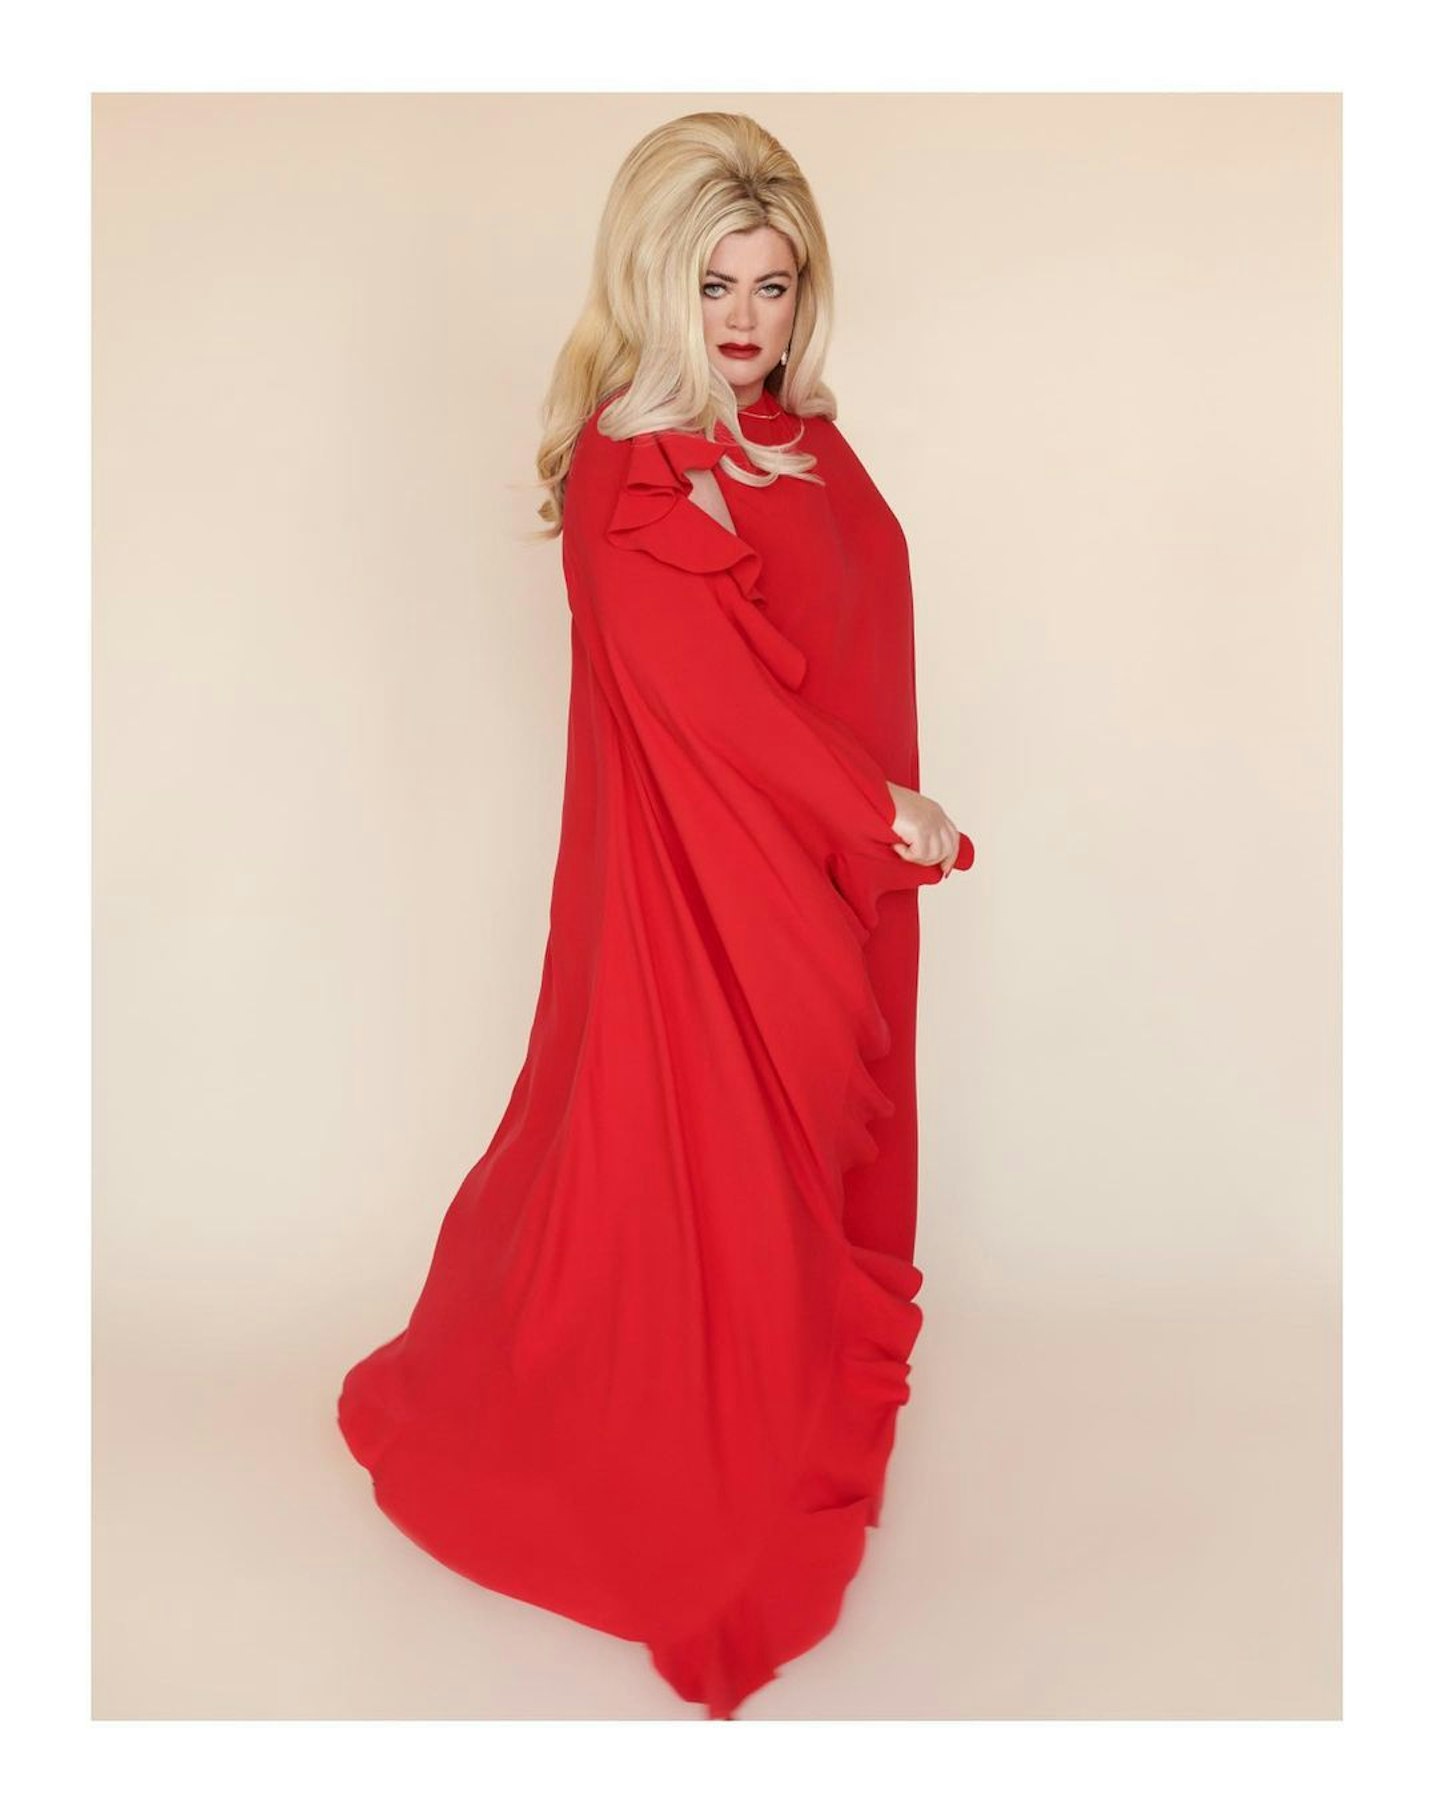 Gemma Collins wearing a red maxi dress from Valentino 